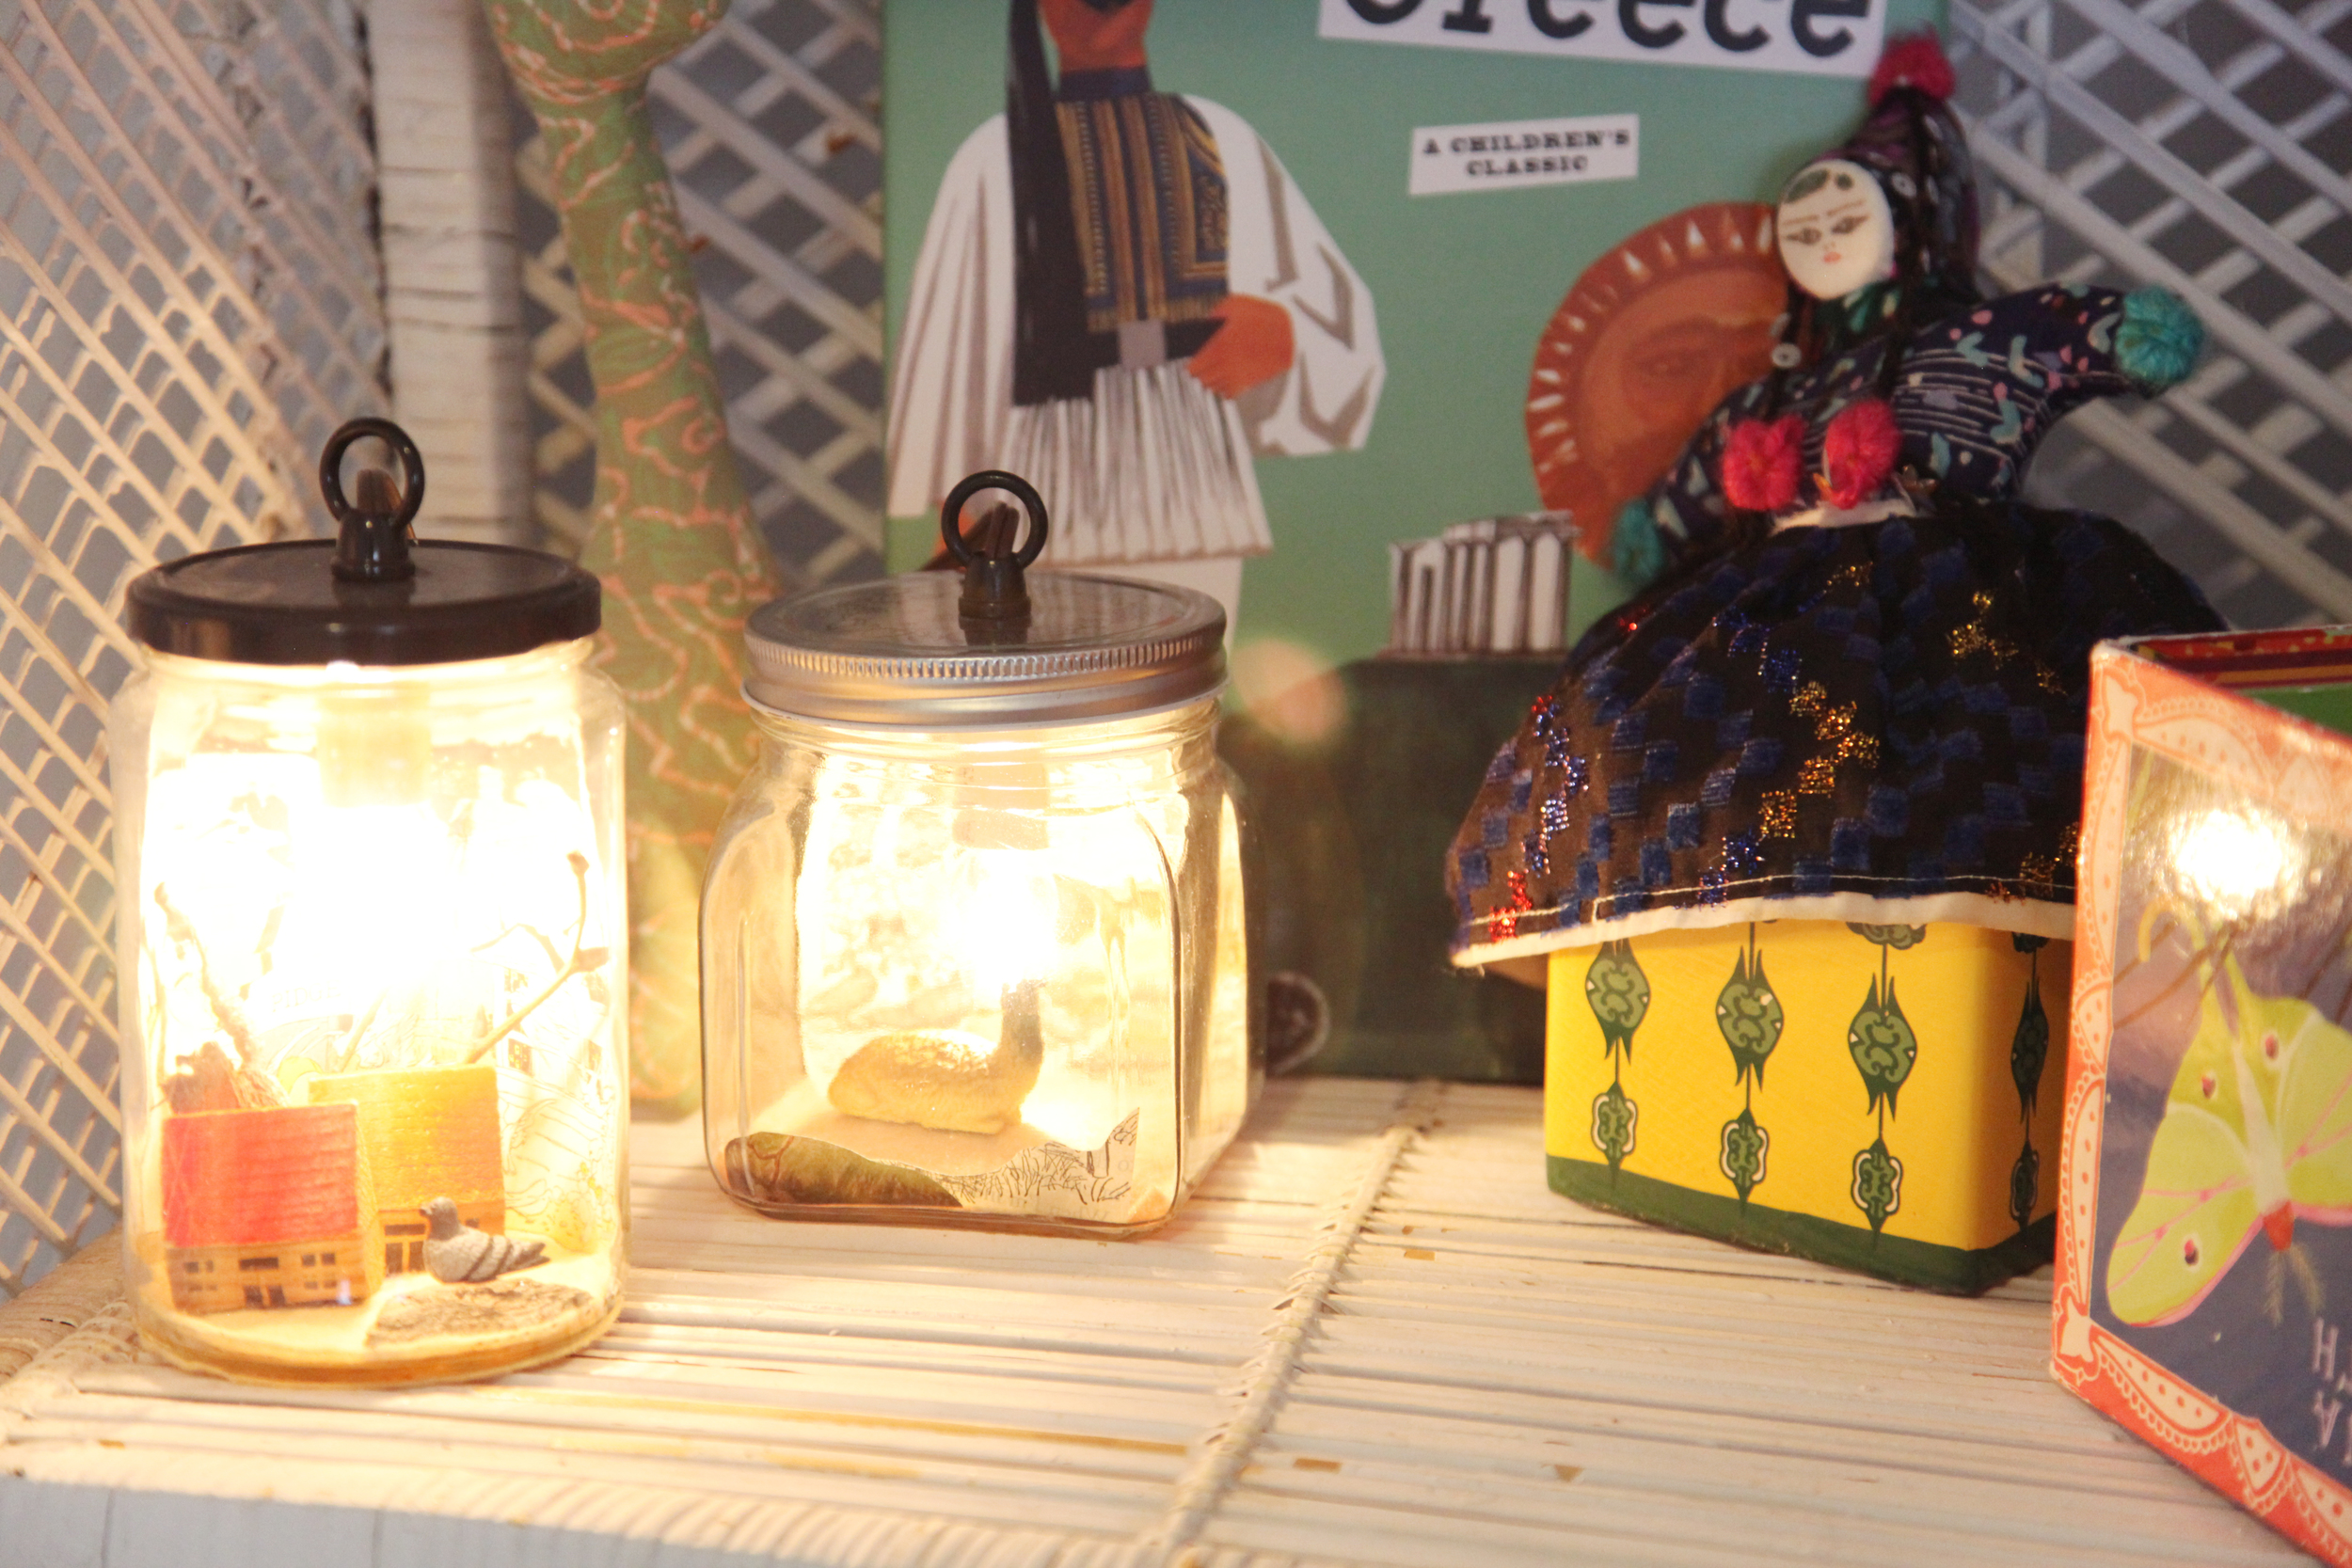  Little diorama lanterns by   Small Home .  Dana met the creator at the Williamsburg holiday market years ago and had her make a custom lamp with a pigeon in it when she was pregnant with Georgia, who's nickname was "Pidge" in utero.&nbsp; 